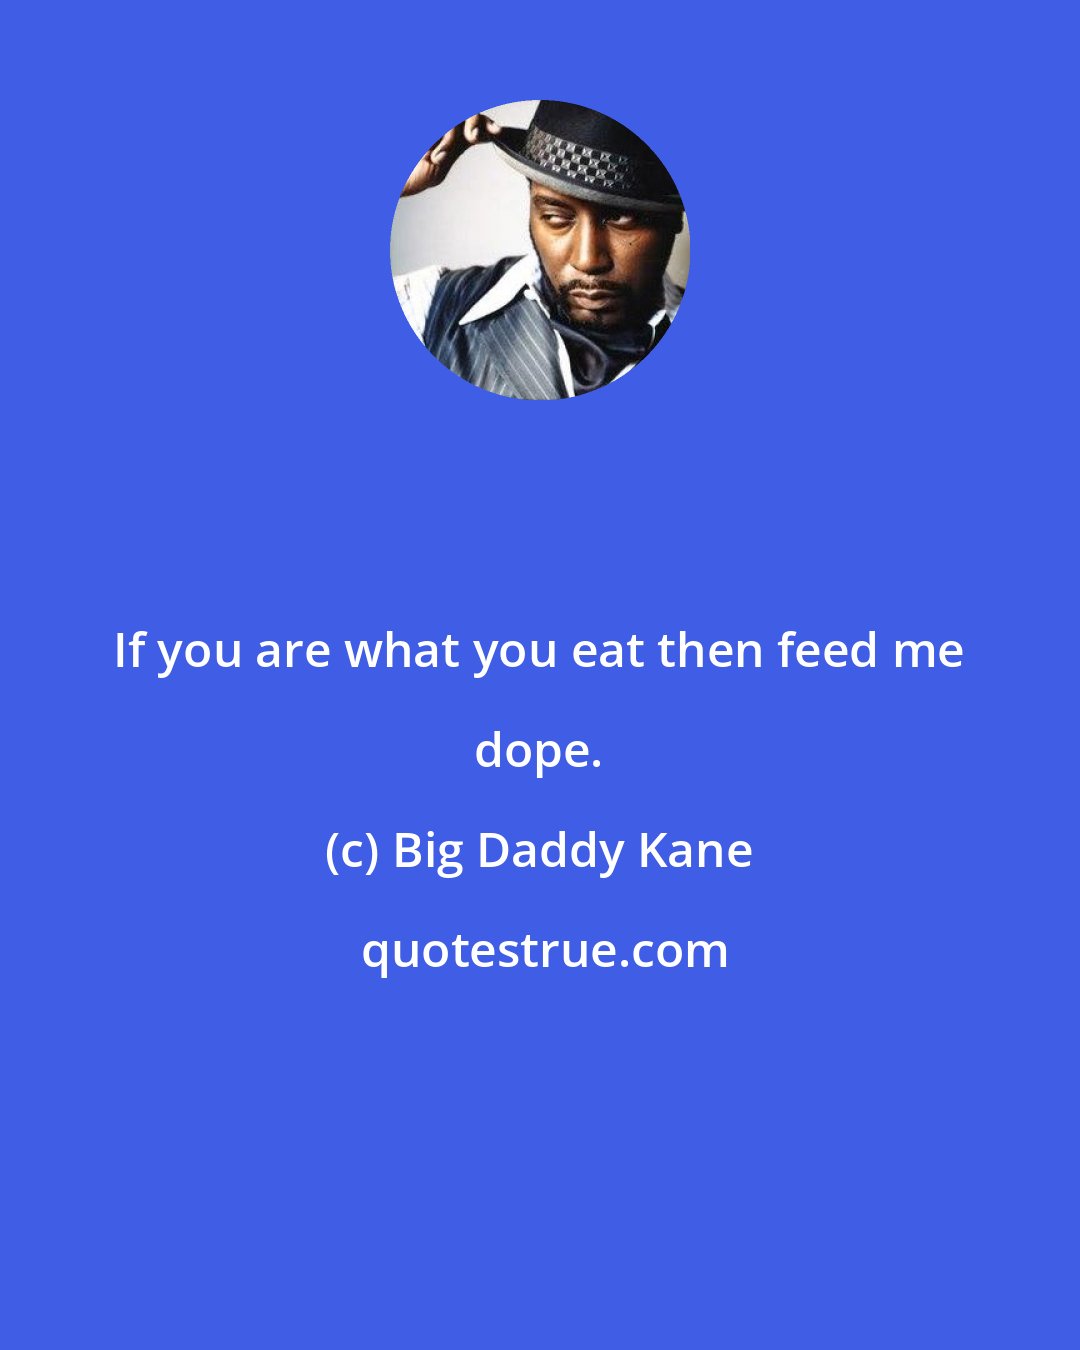 Big Daddy Kane: If you are what you eat then feed me dope.